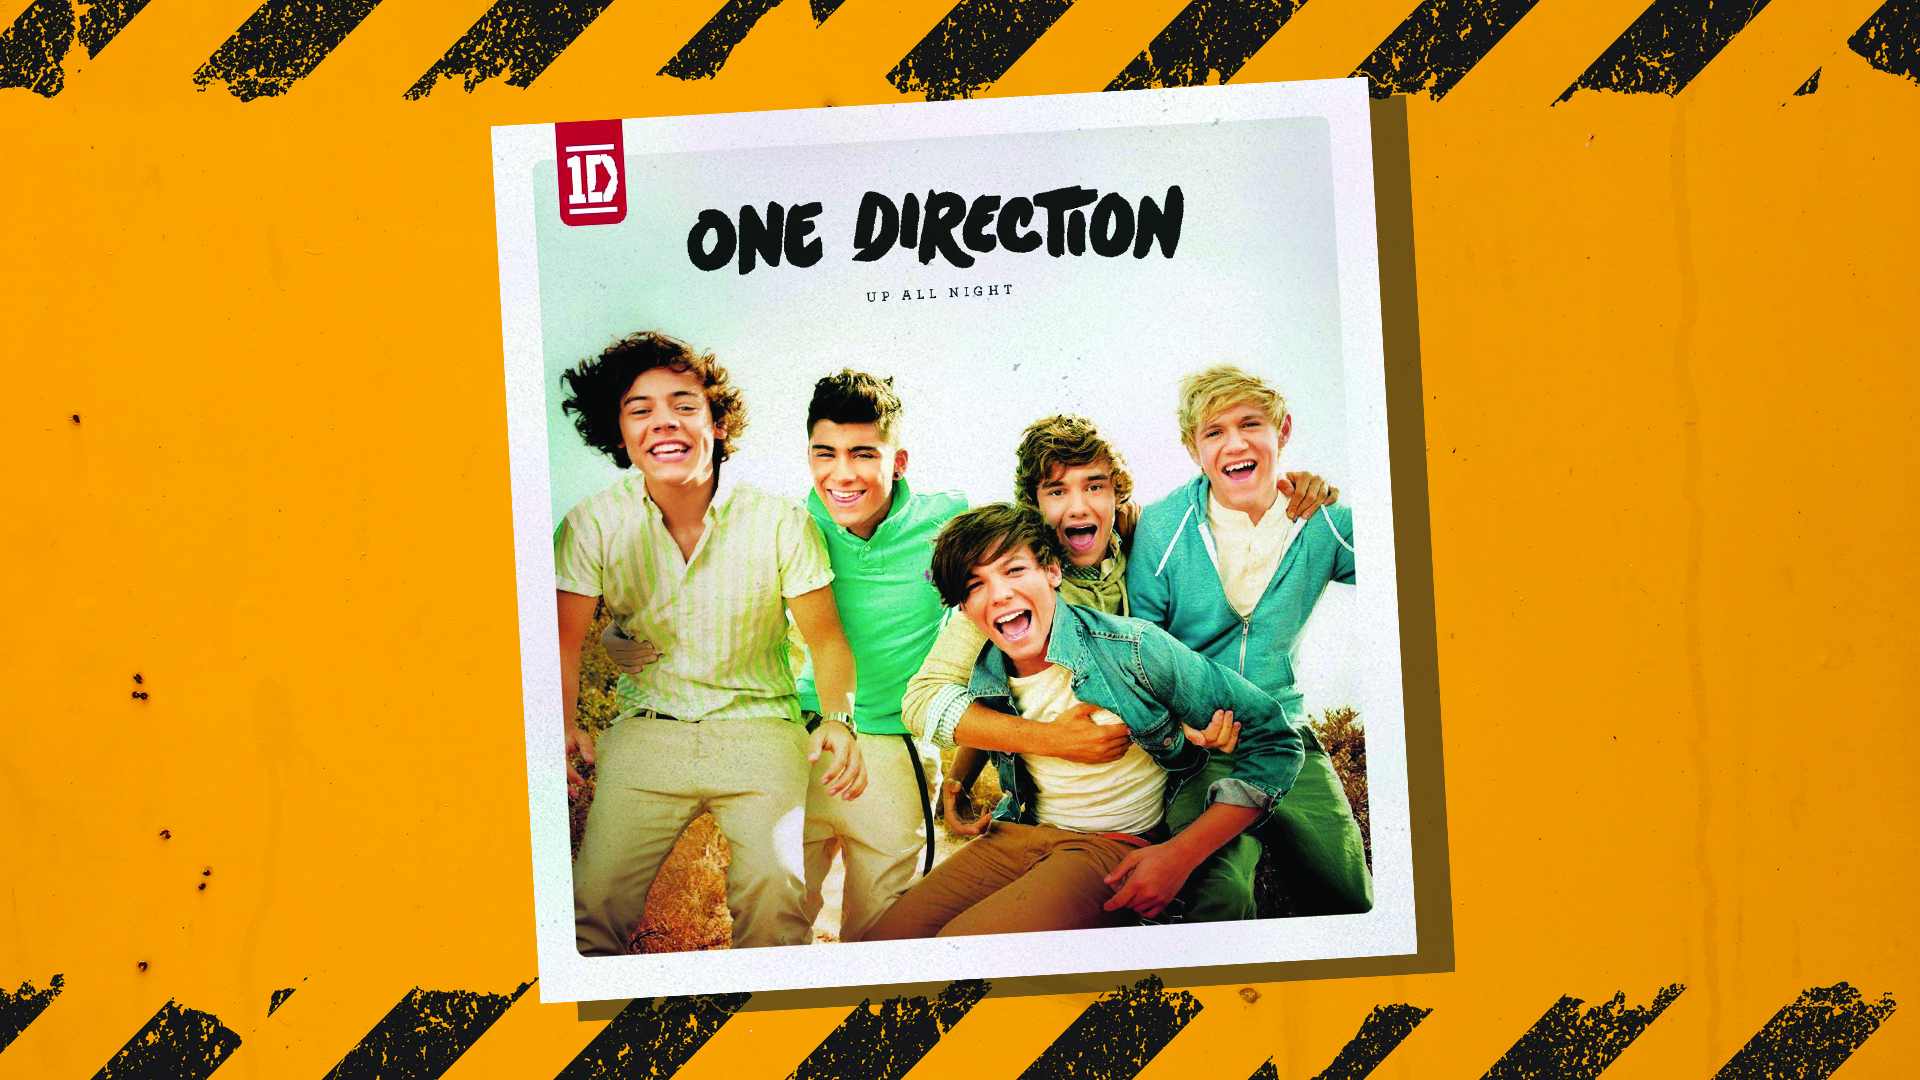 One Direction's album Up All Night 